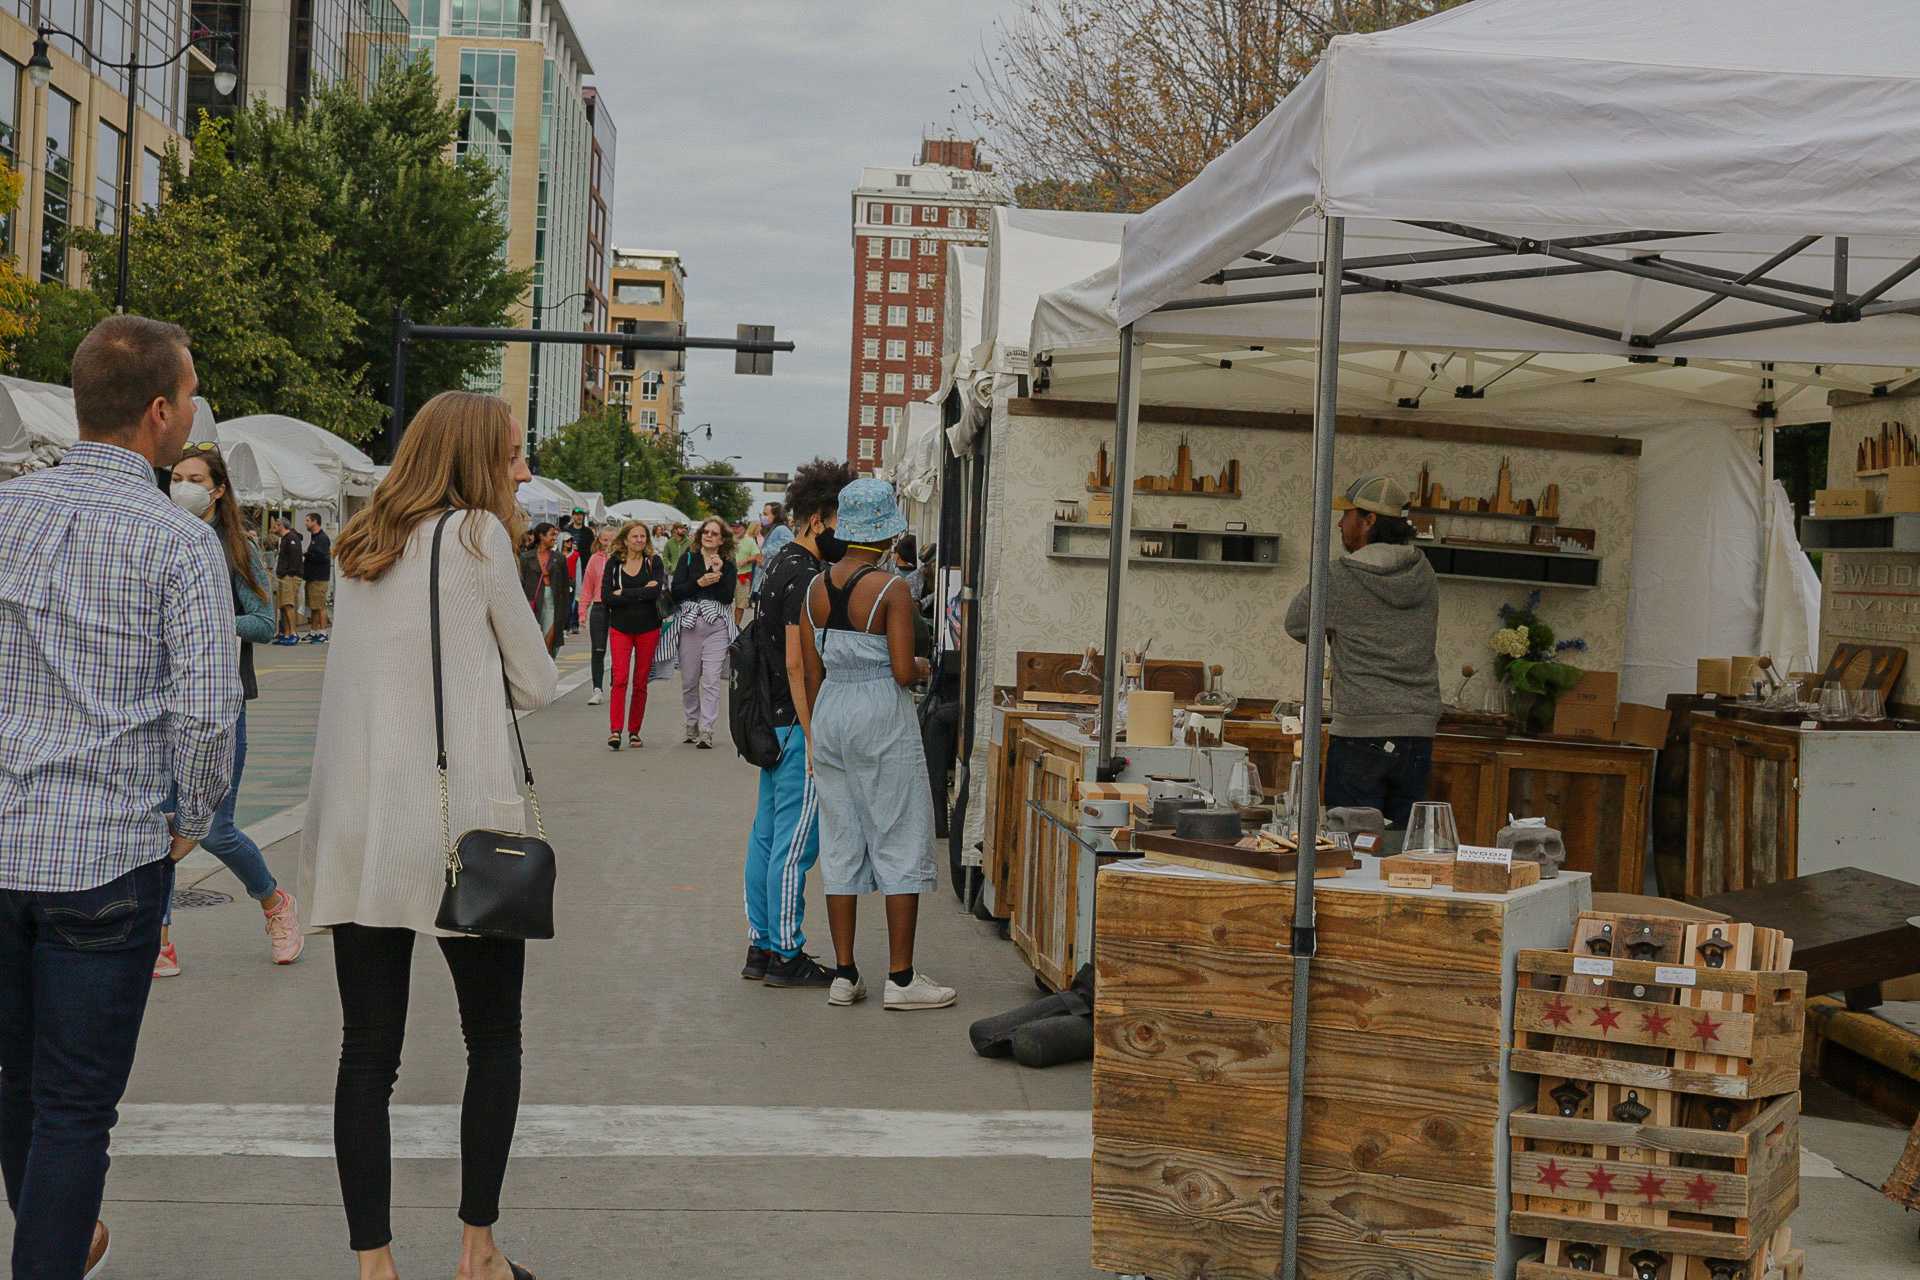 Annual Art Fair on the Square returns, bringing with it new era for